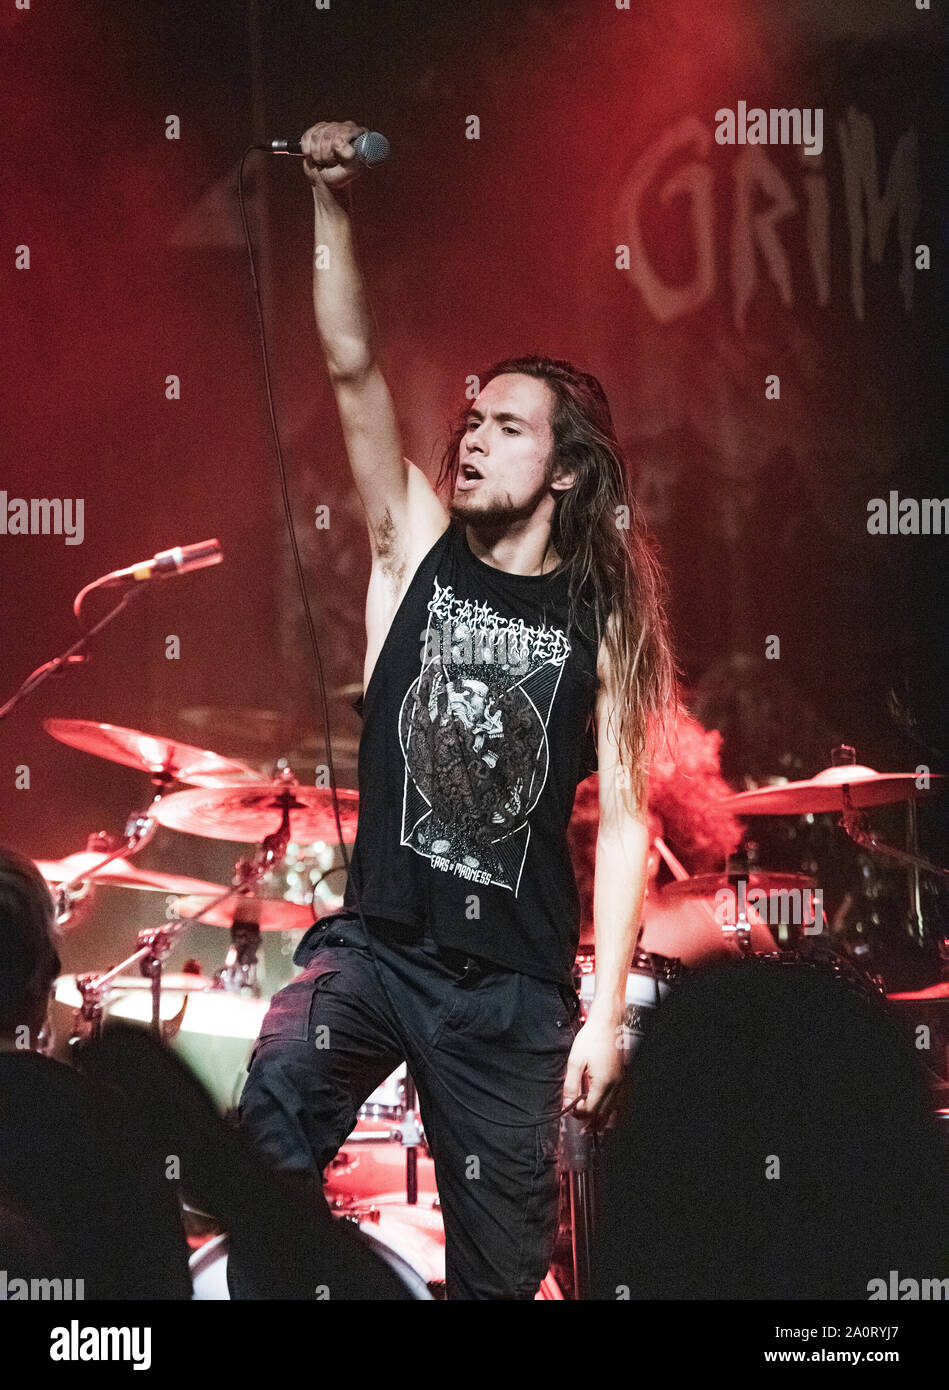 Copenhagen, Denmark. 17th, September 2019. The Bulgarian metal band Grimaze  performs a live concert at Hotel Cecil in Copenhagen. Here vocalist Georgi  Ivanov is seen live on stage. (Photo credit: Gonzales Photo -